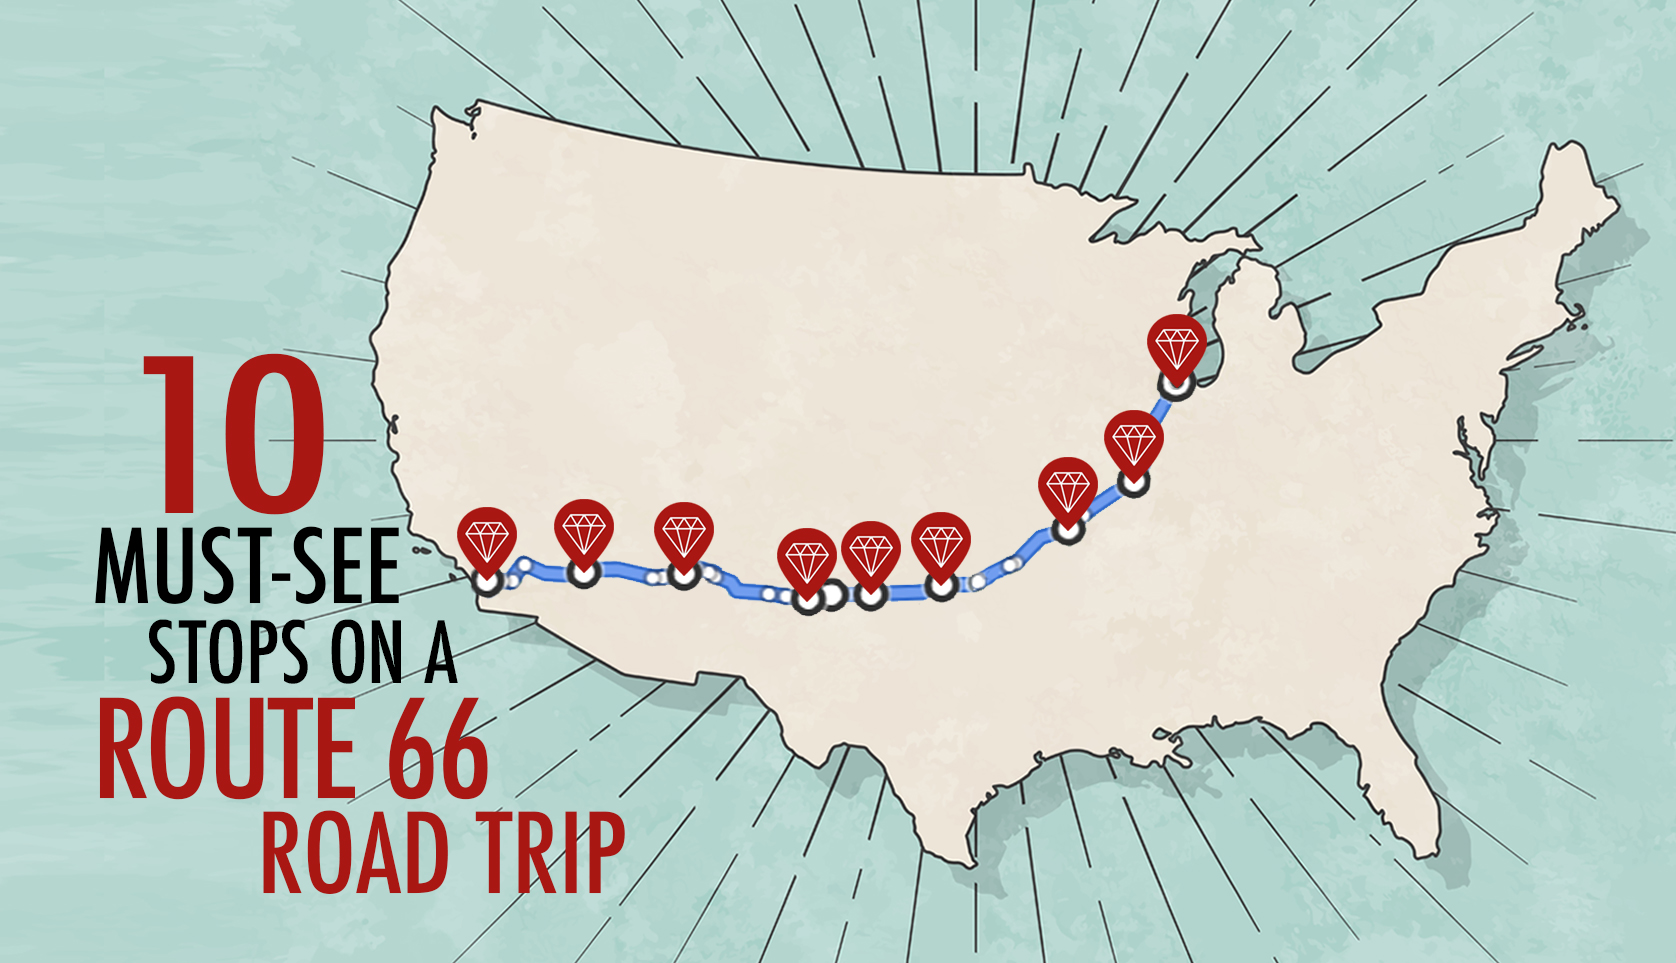 If You're On A Route 66 Road Trip, You Can't Miss These Stops